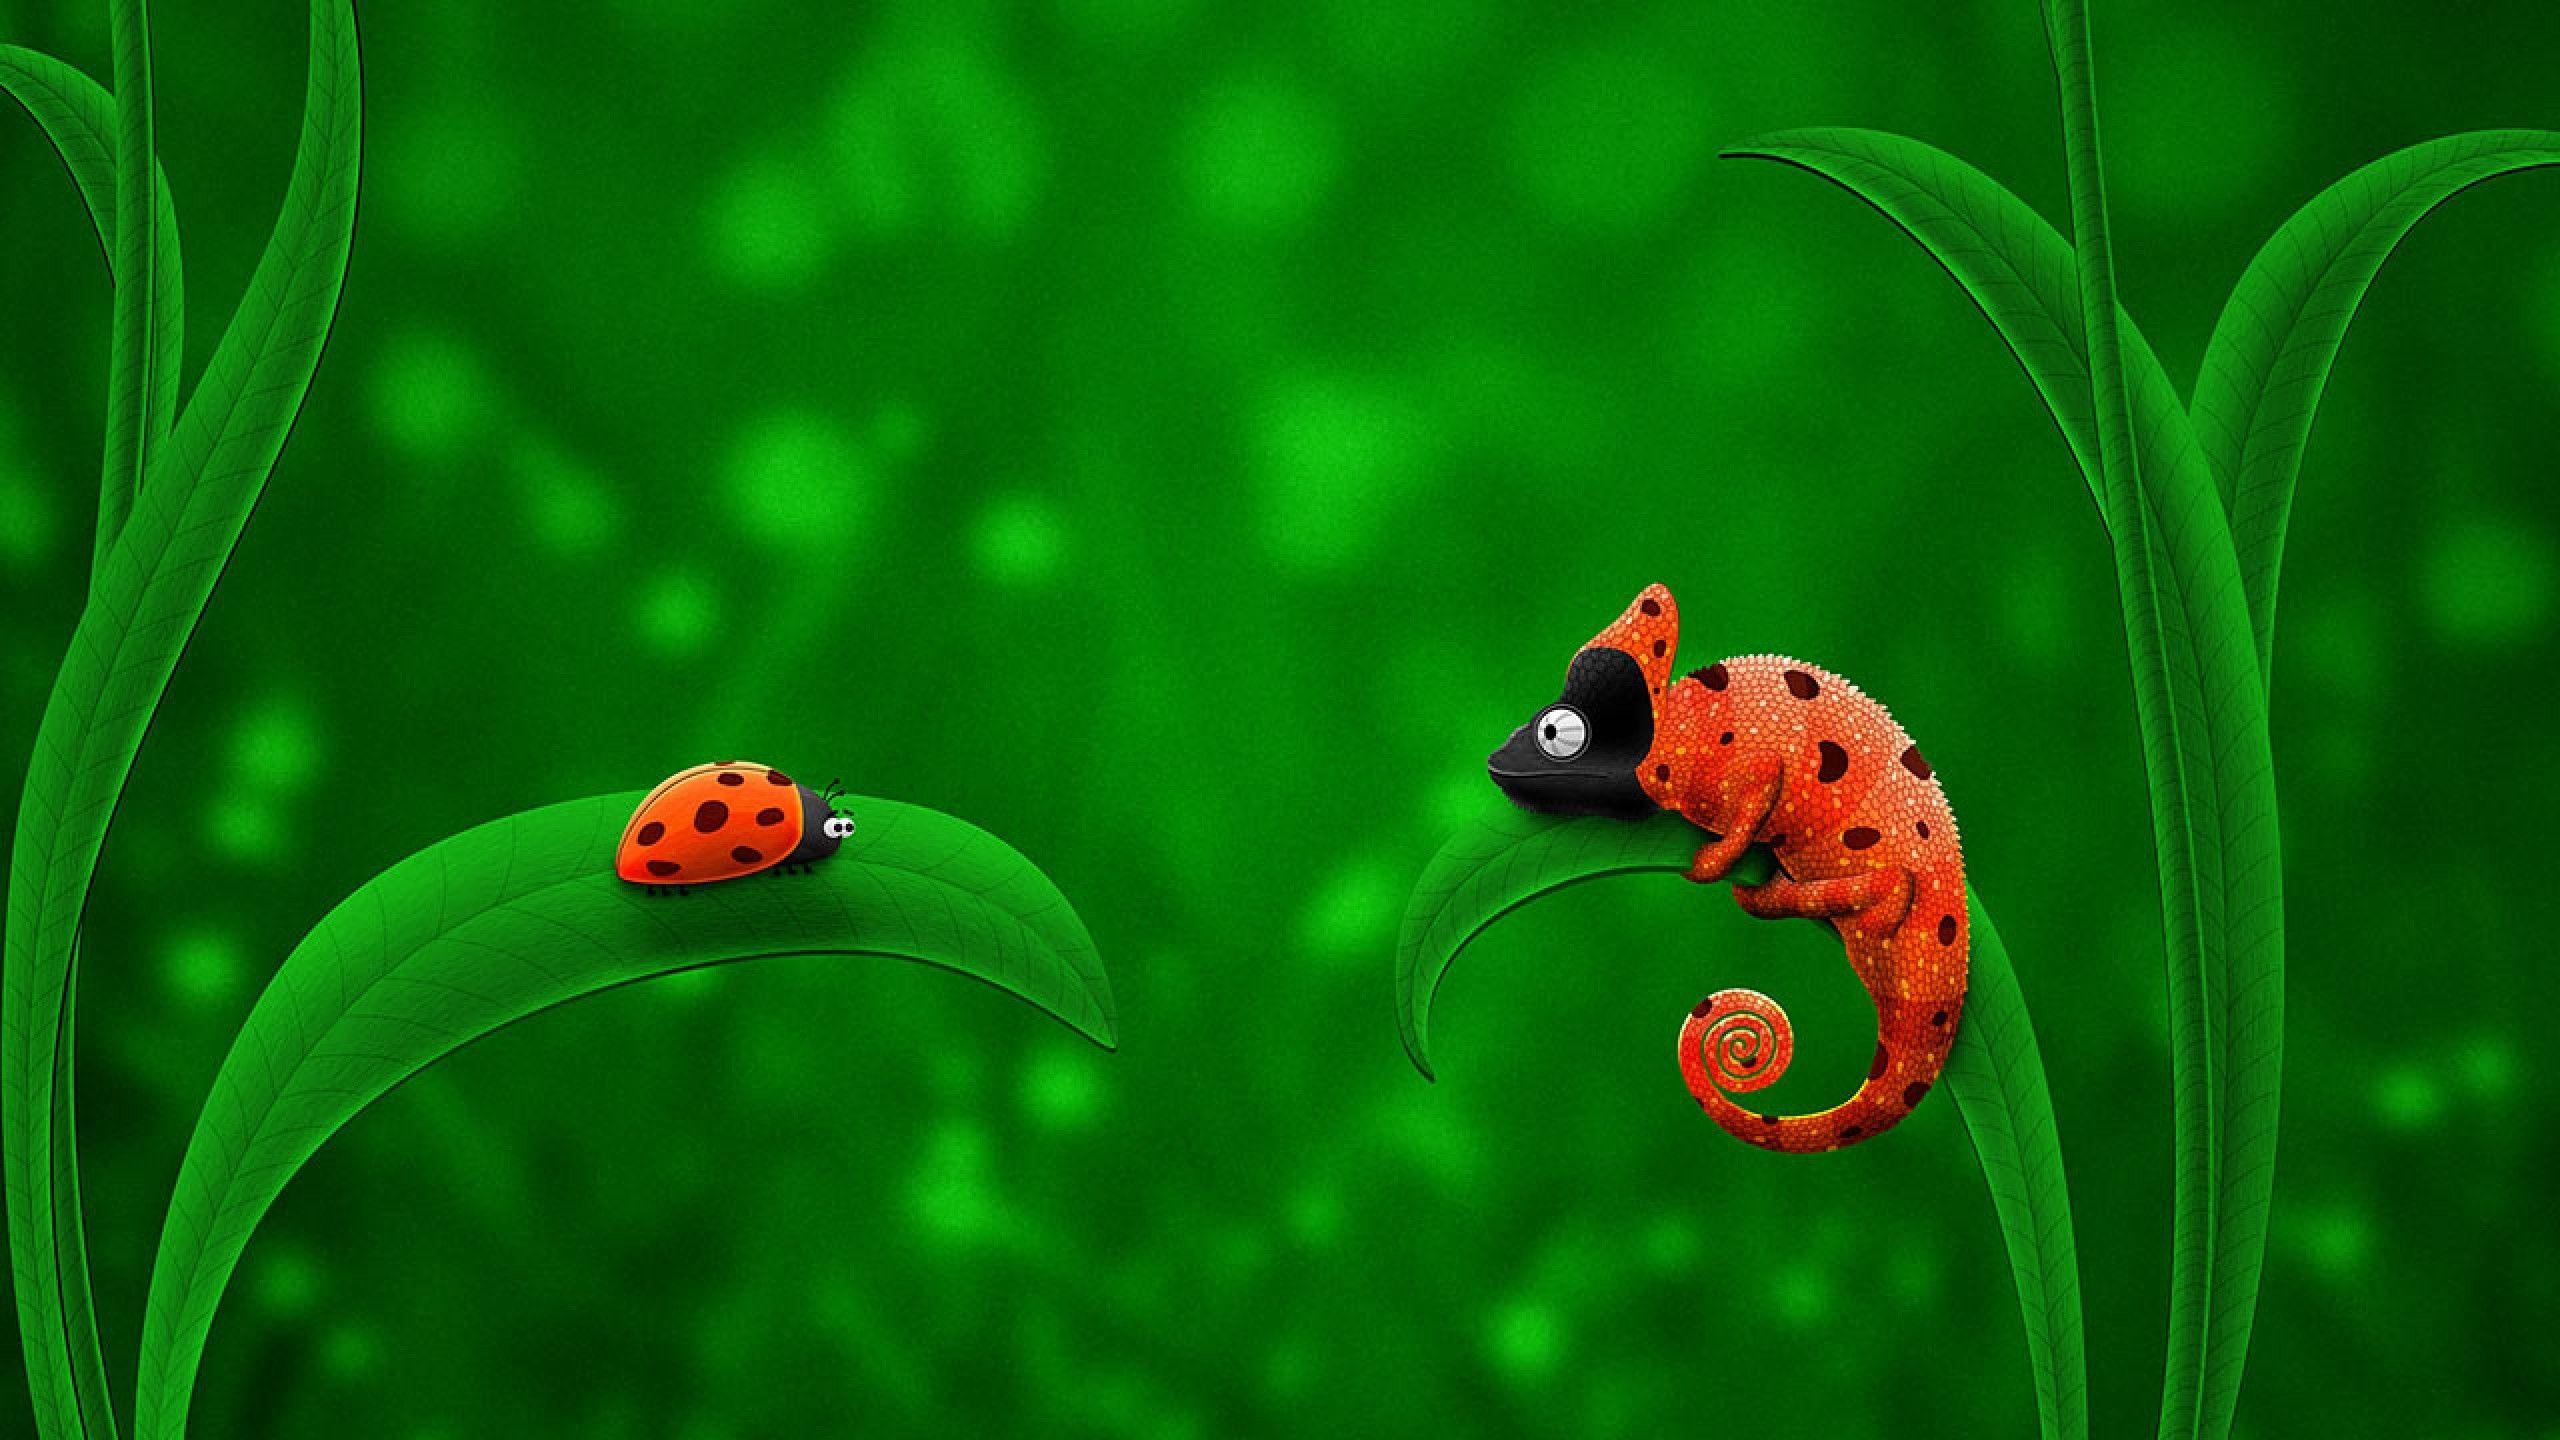 Download Cute Bug Wallpapers - Top Free Cute Bug Backgrounds ...